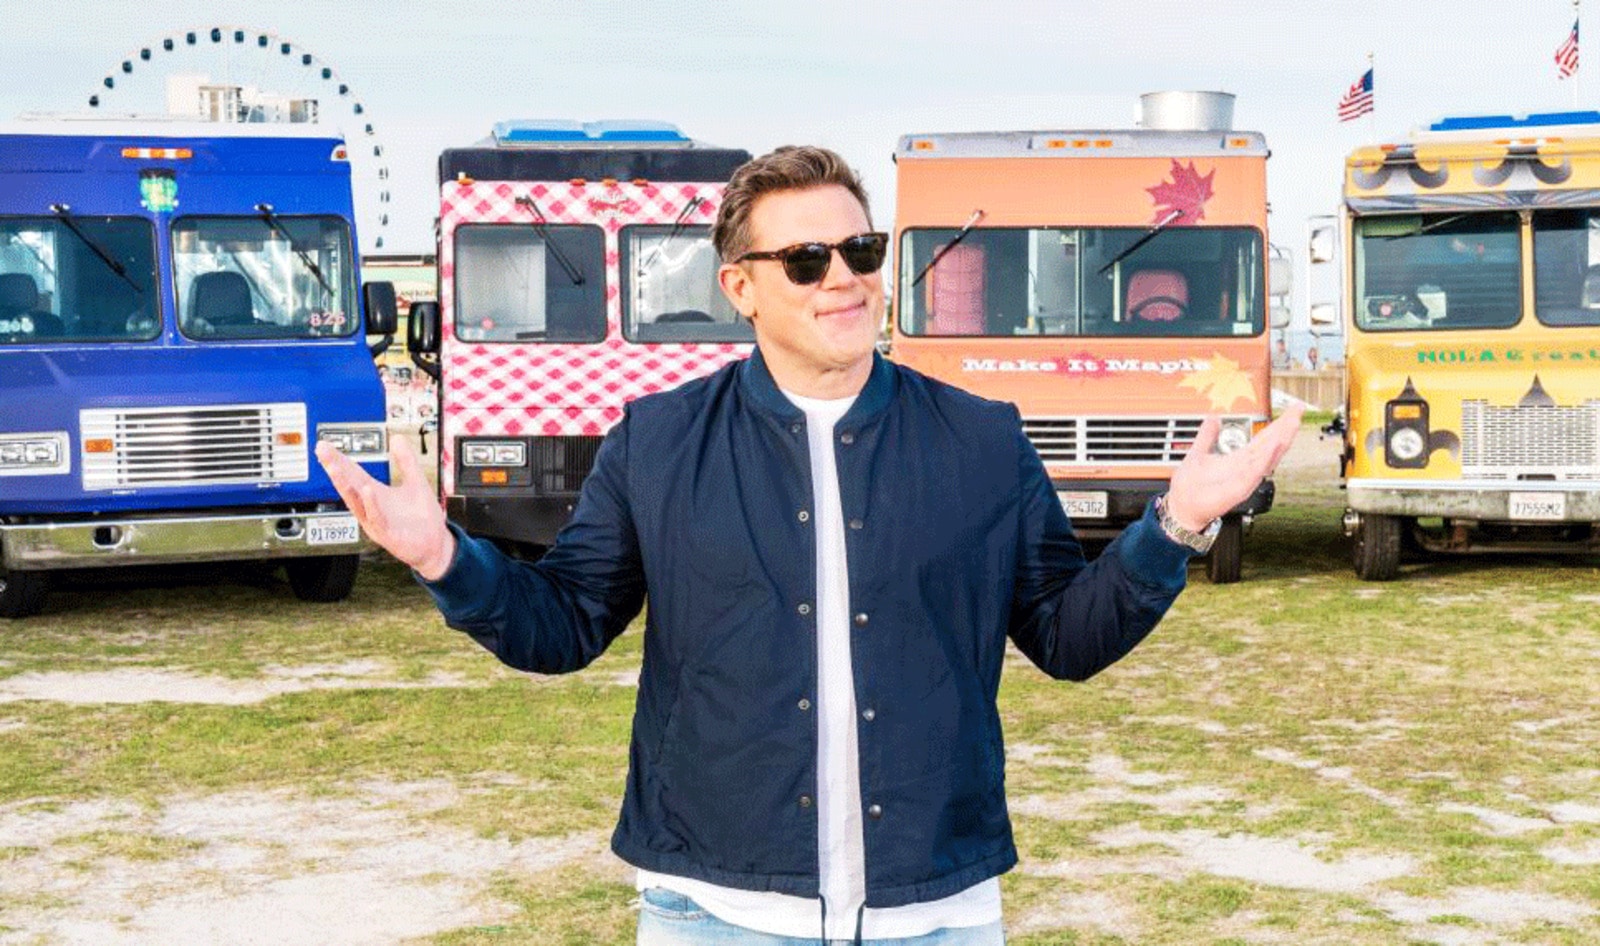 Vegan Chef Competes on New Season of Food Network’s <i>The Great Food Truck Race</i>